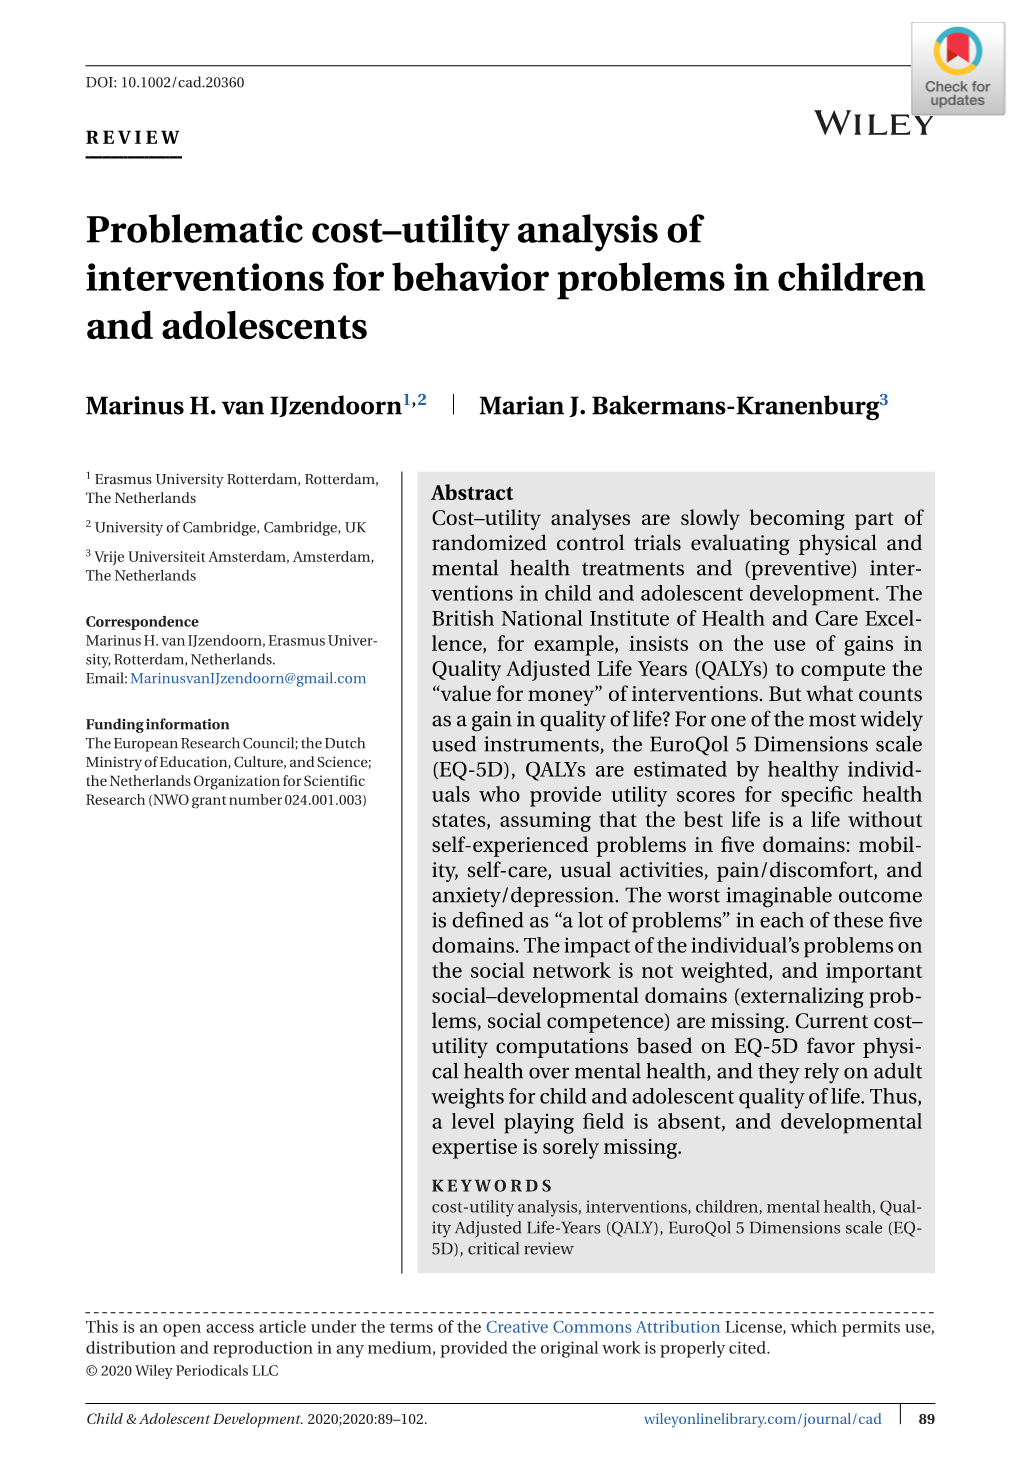 Problematic Cost–Utility Analysis of Interventions for Behavior Problems in Children and Adolescents